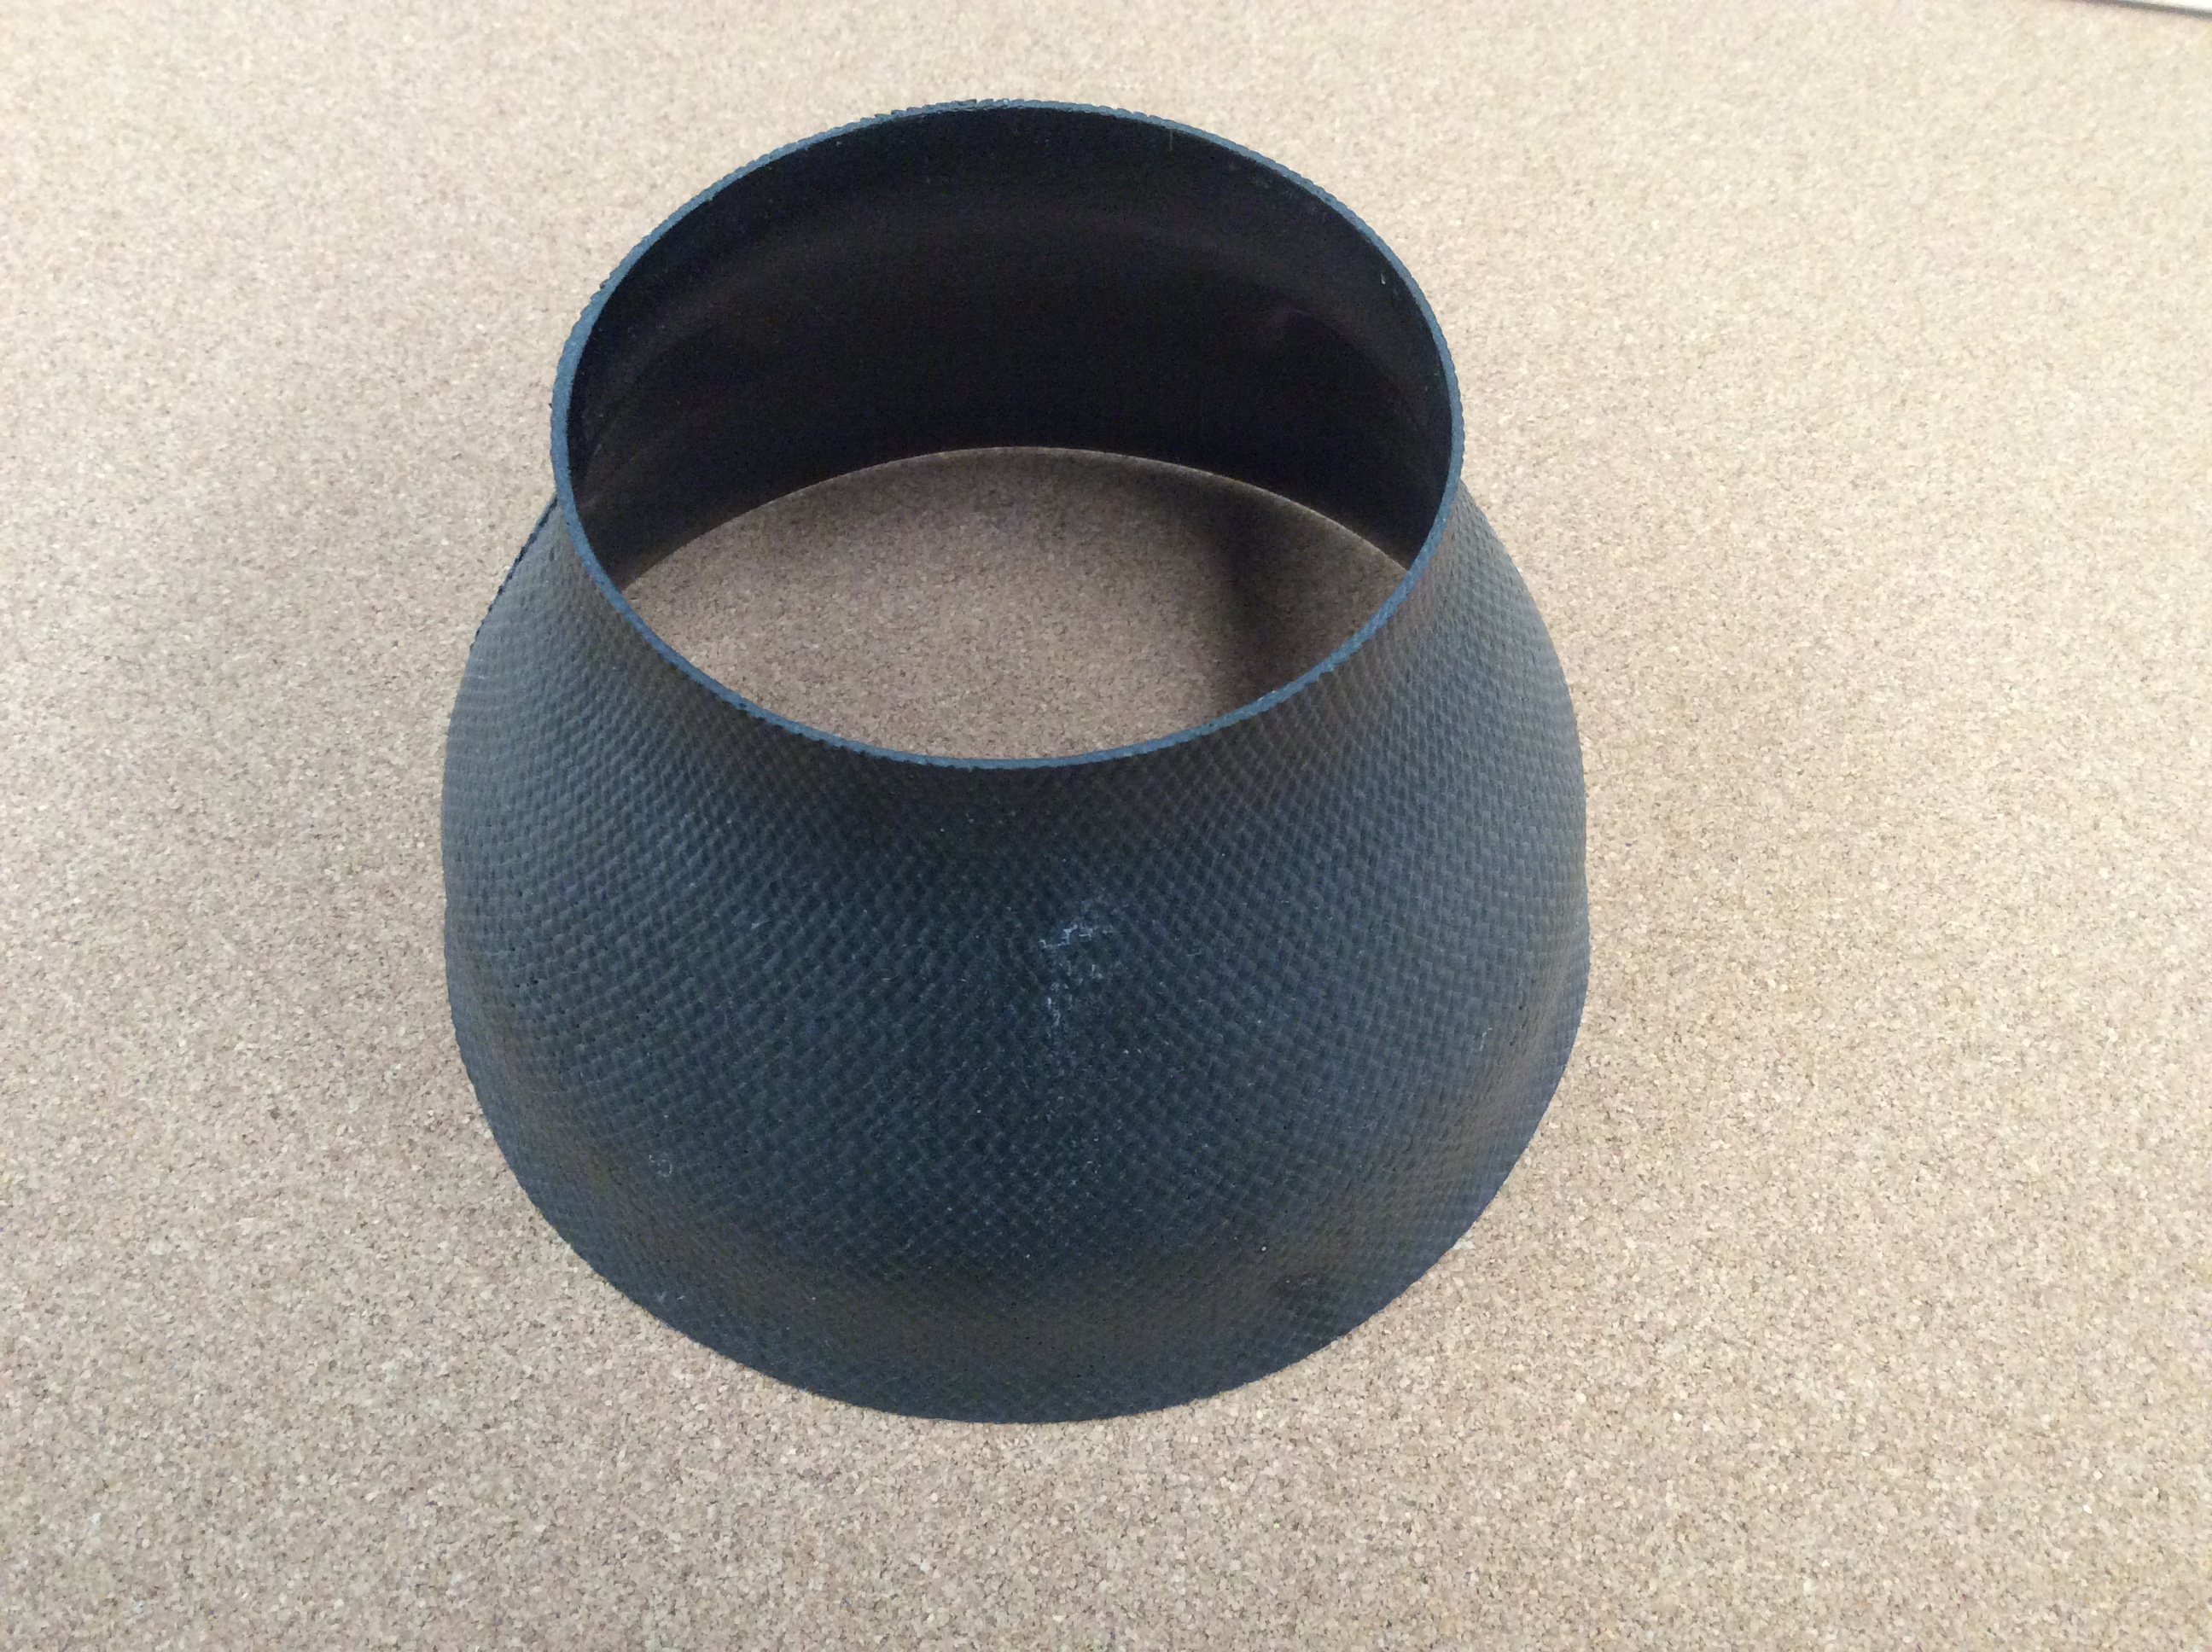 Carbon bell mouth (85mm dia pipe)